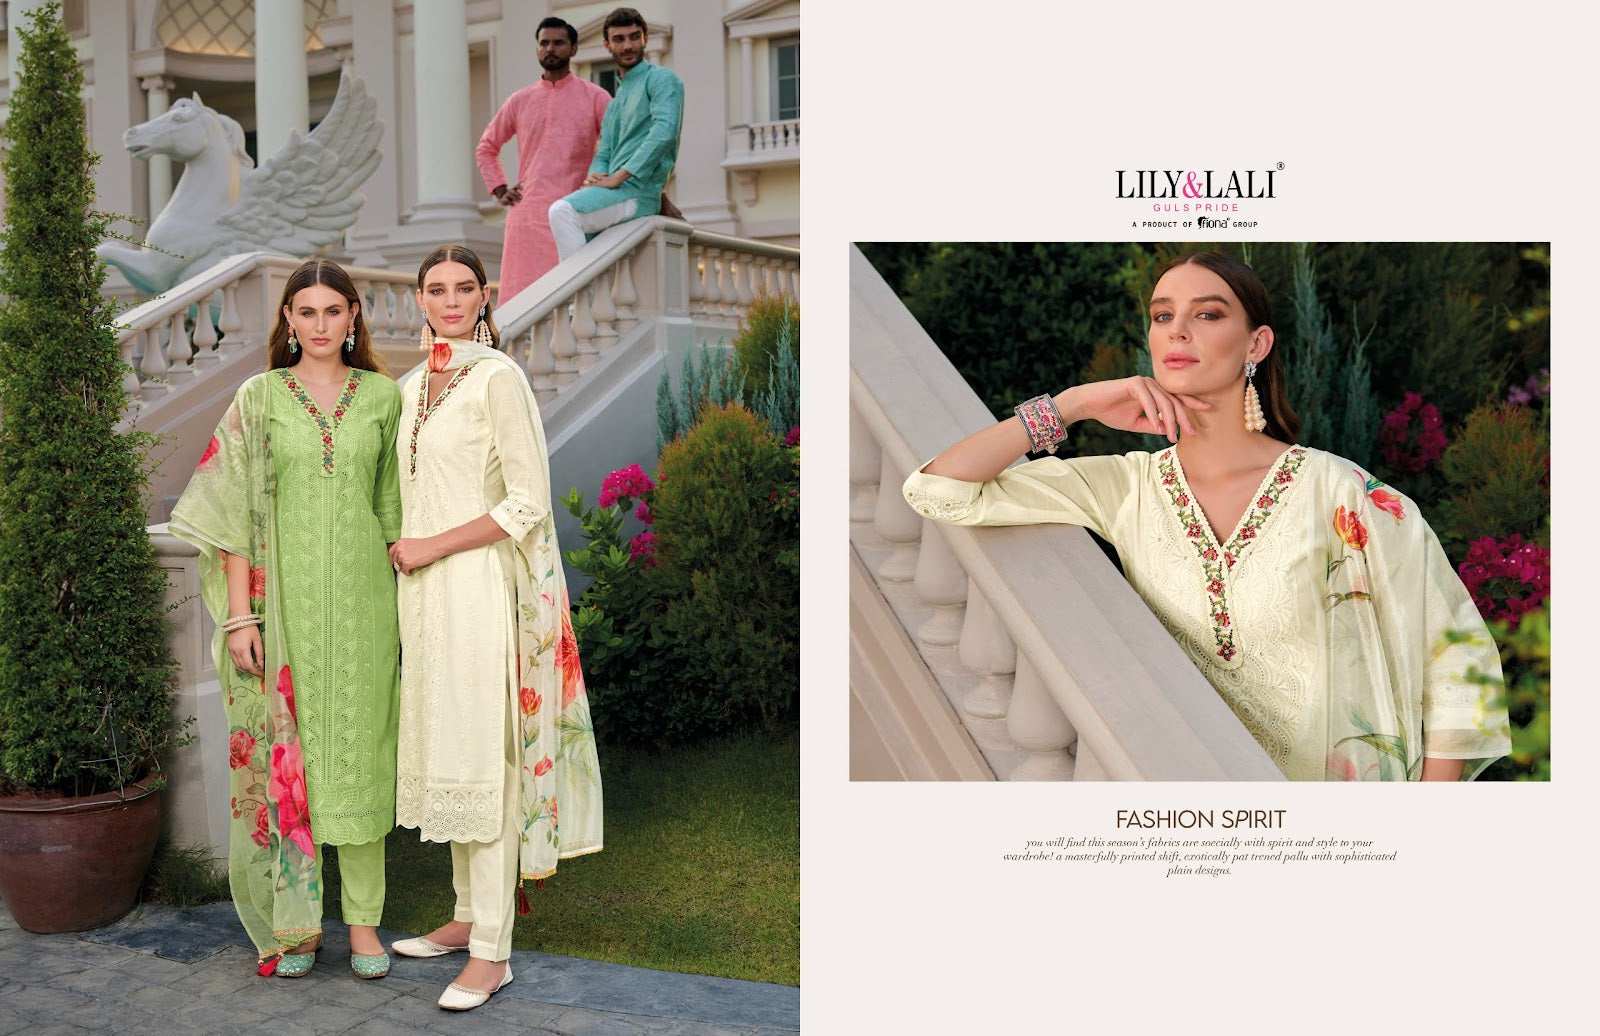 Rozan Lily Lali Chanderi Readymade Pant Style Suits